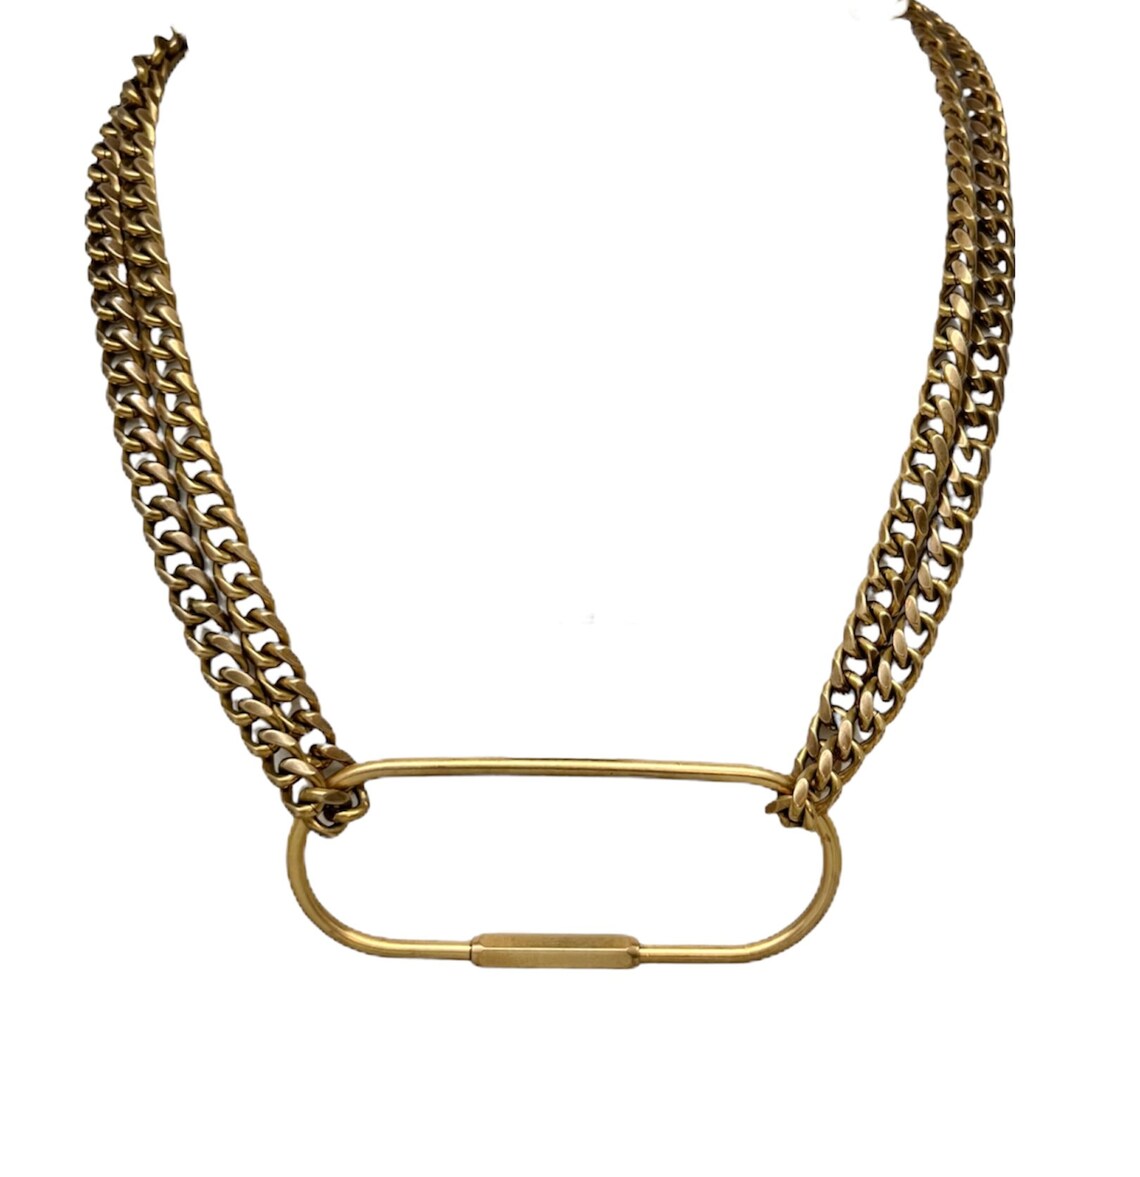 Large Carabiner Necklace